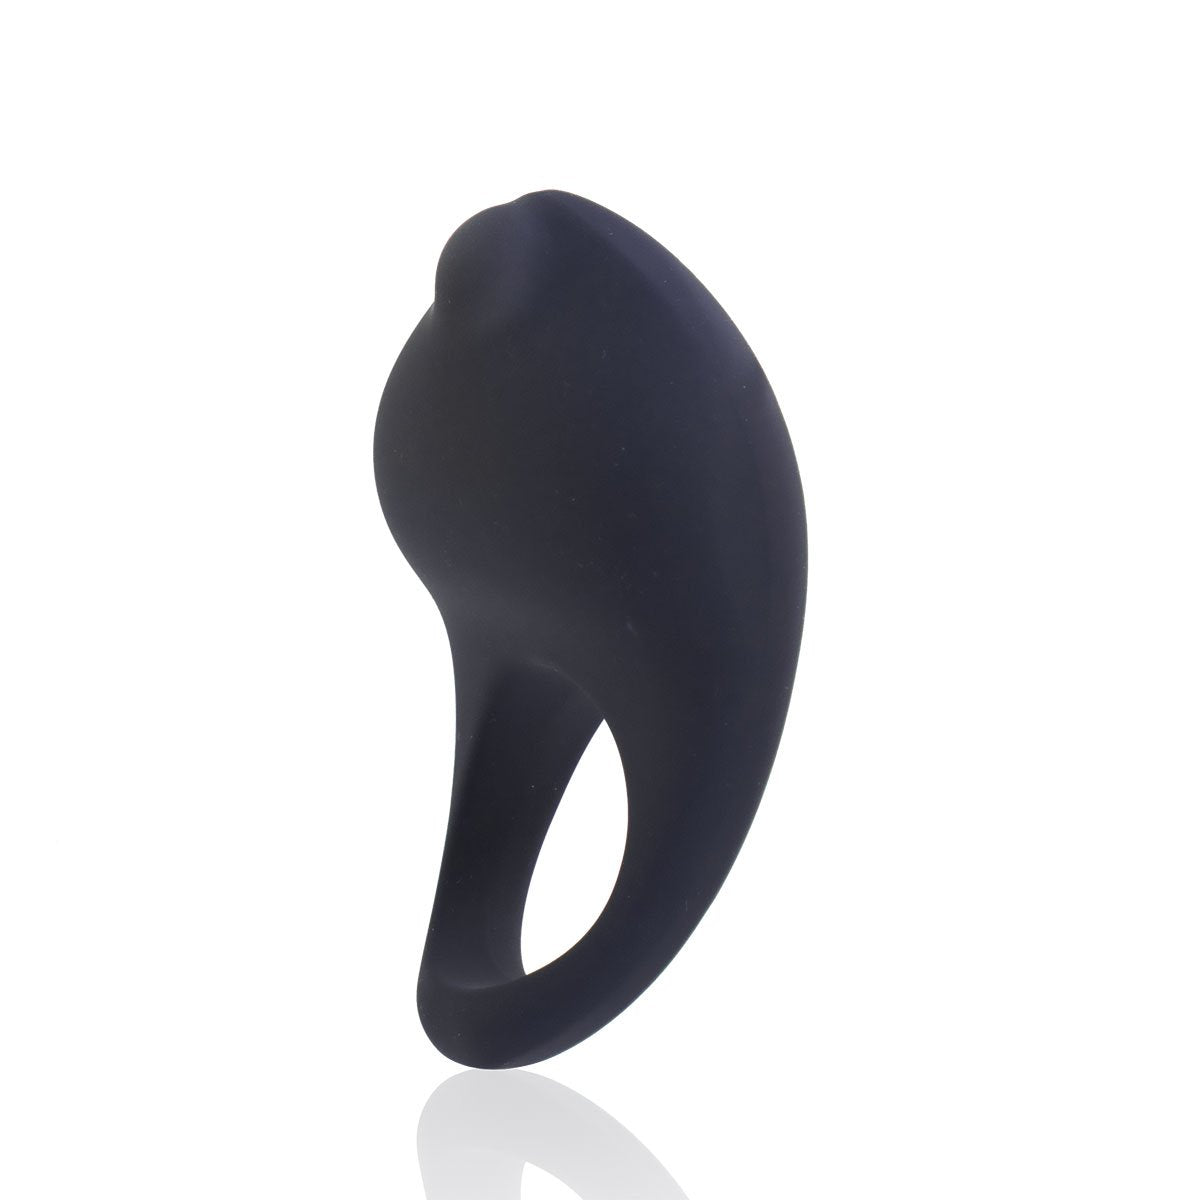 Roq Rechargeable Ring is by far the most powerful cockring available. Boasting 10 supercharged vibration modes. The silky smooth silicone and unique nub tip will tantalise hot spots in all the right places.